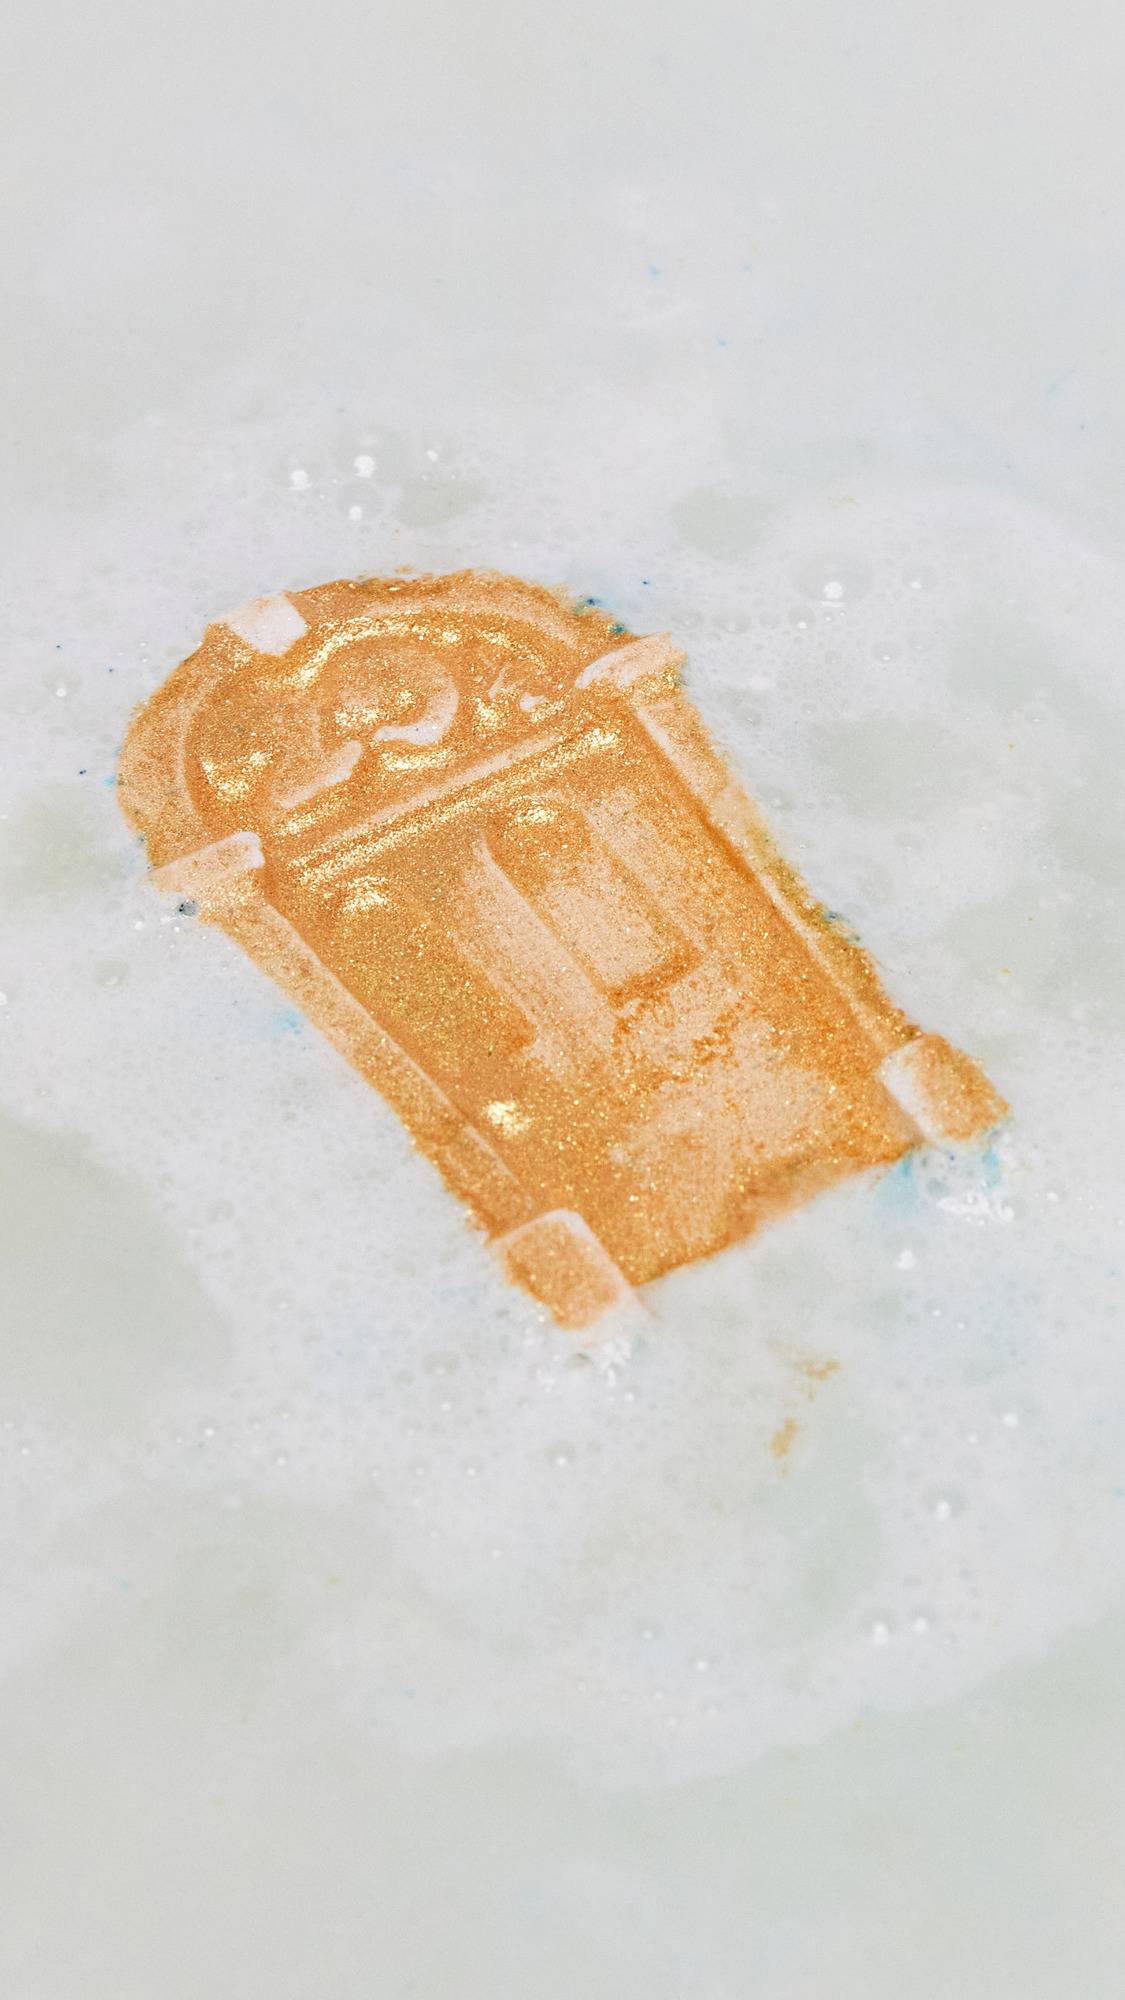 The Iconic Door bath bomb has been gently placed into the bath as it creates delicate teal waters and light foam as the golden lustre sits on top of the water. 